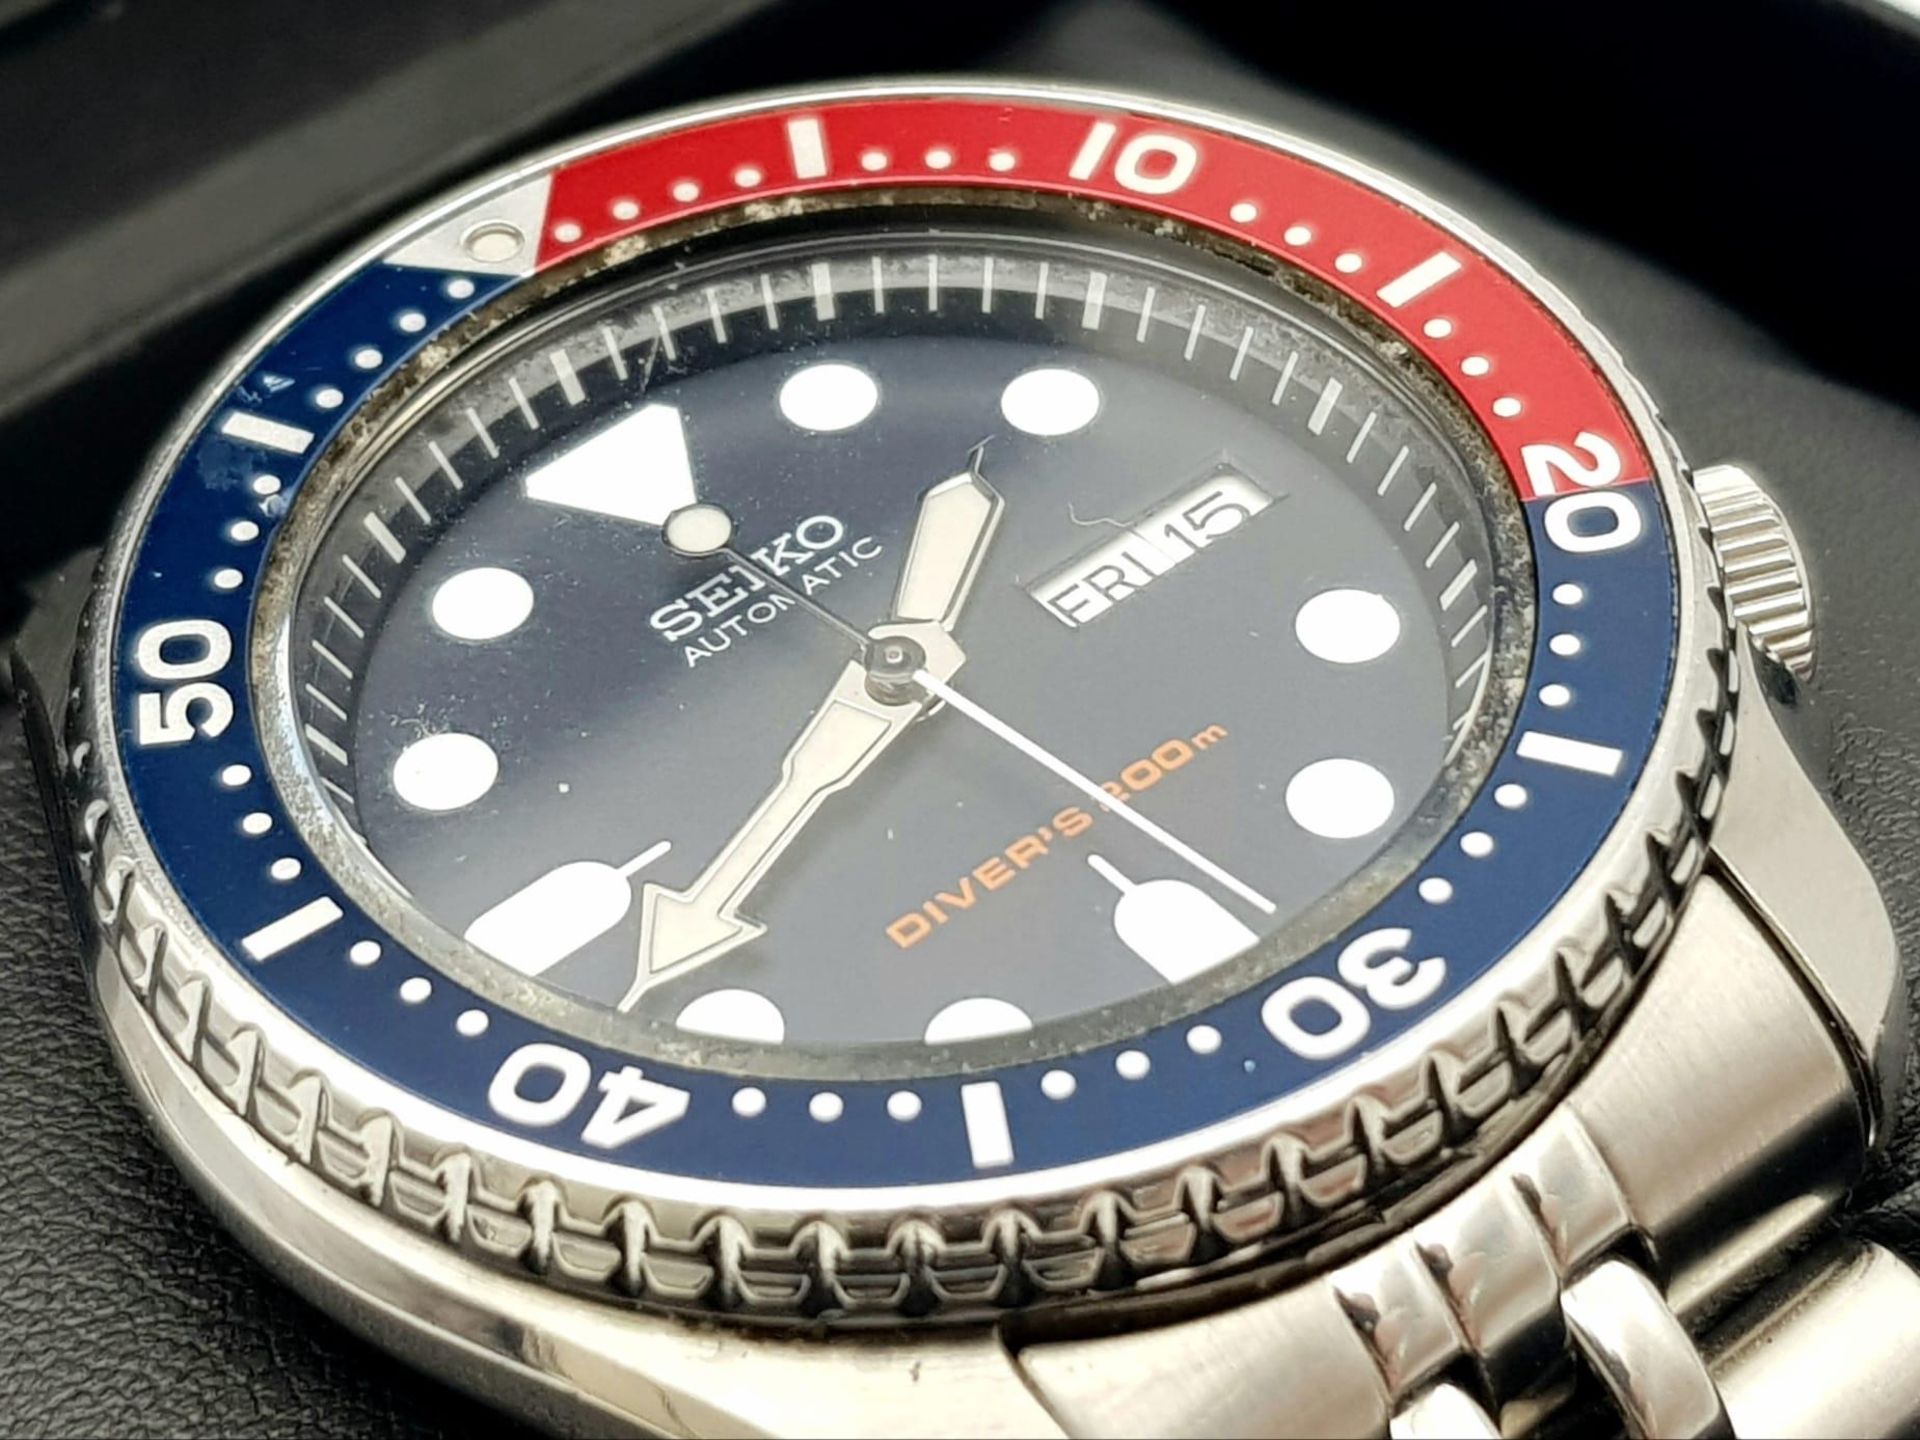 A Seiko 5 Divers 200M Automatic Gents Watch. Stainless steel bracelet and case - 42mm. Blue dial - Bild 5 aus 7